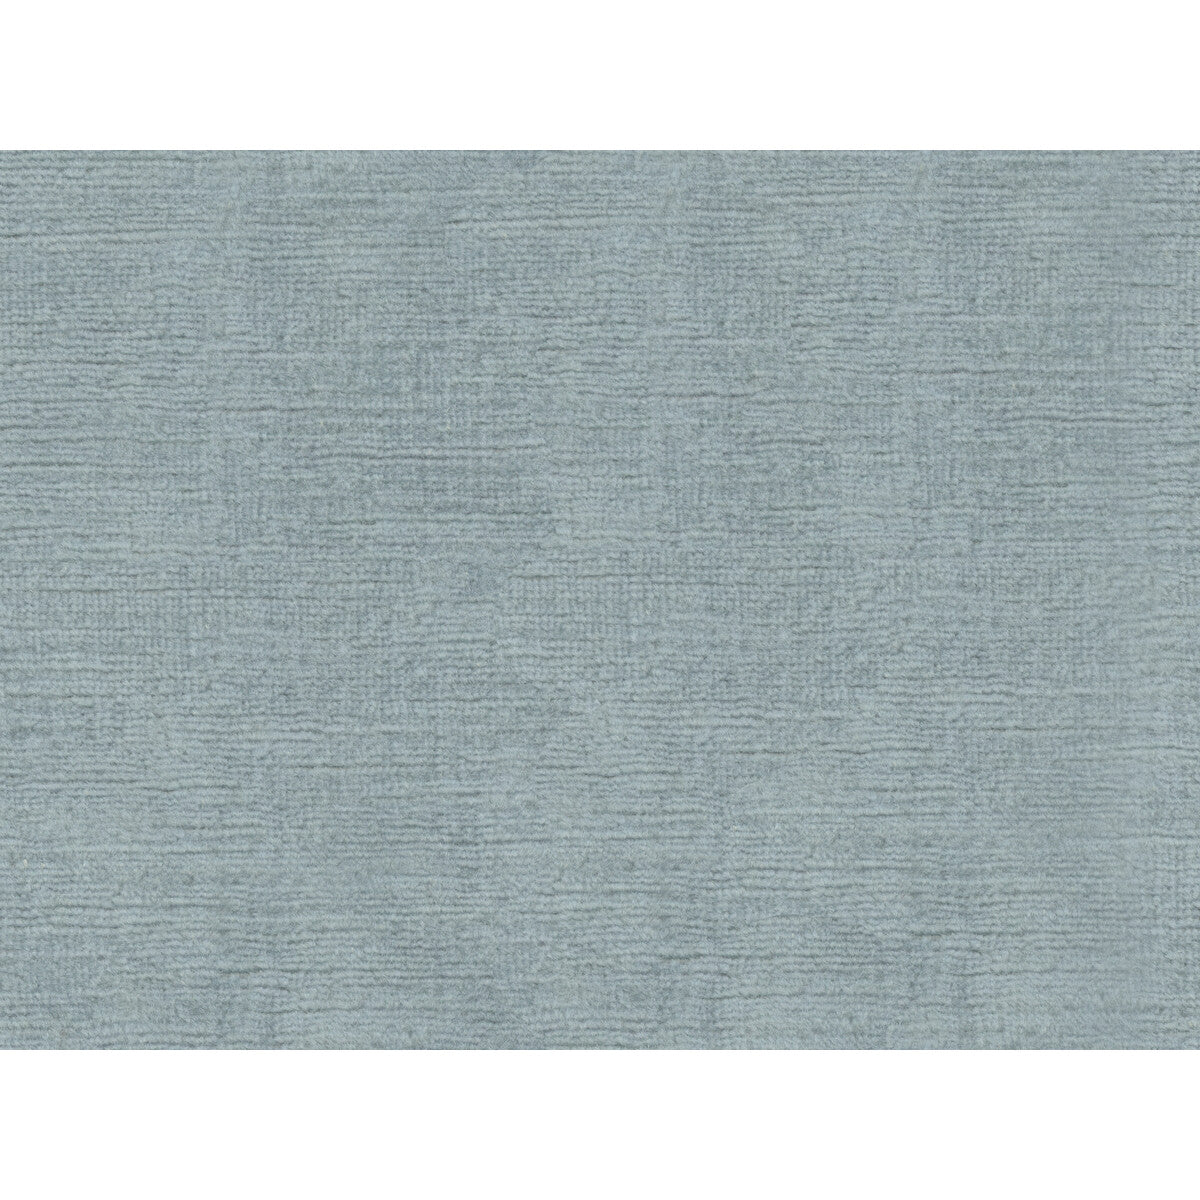 Fulham Linen V fabric in mist color - pattern 2016133.150.0 - by Lee Jofa